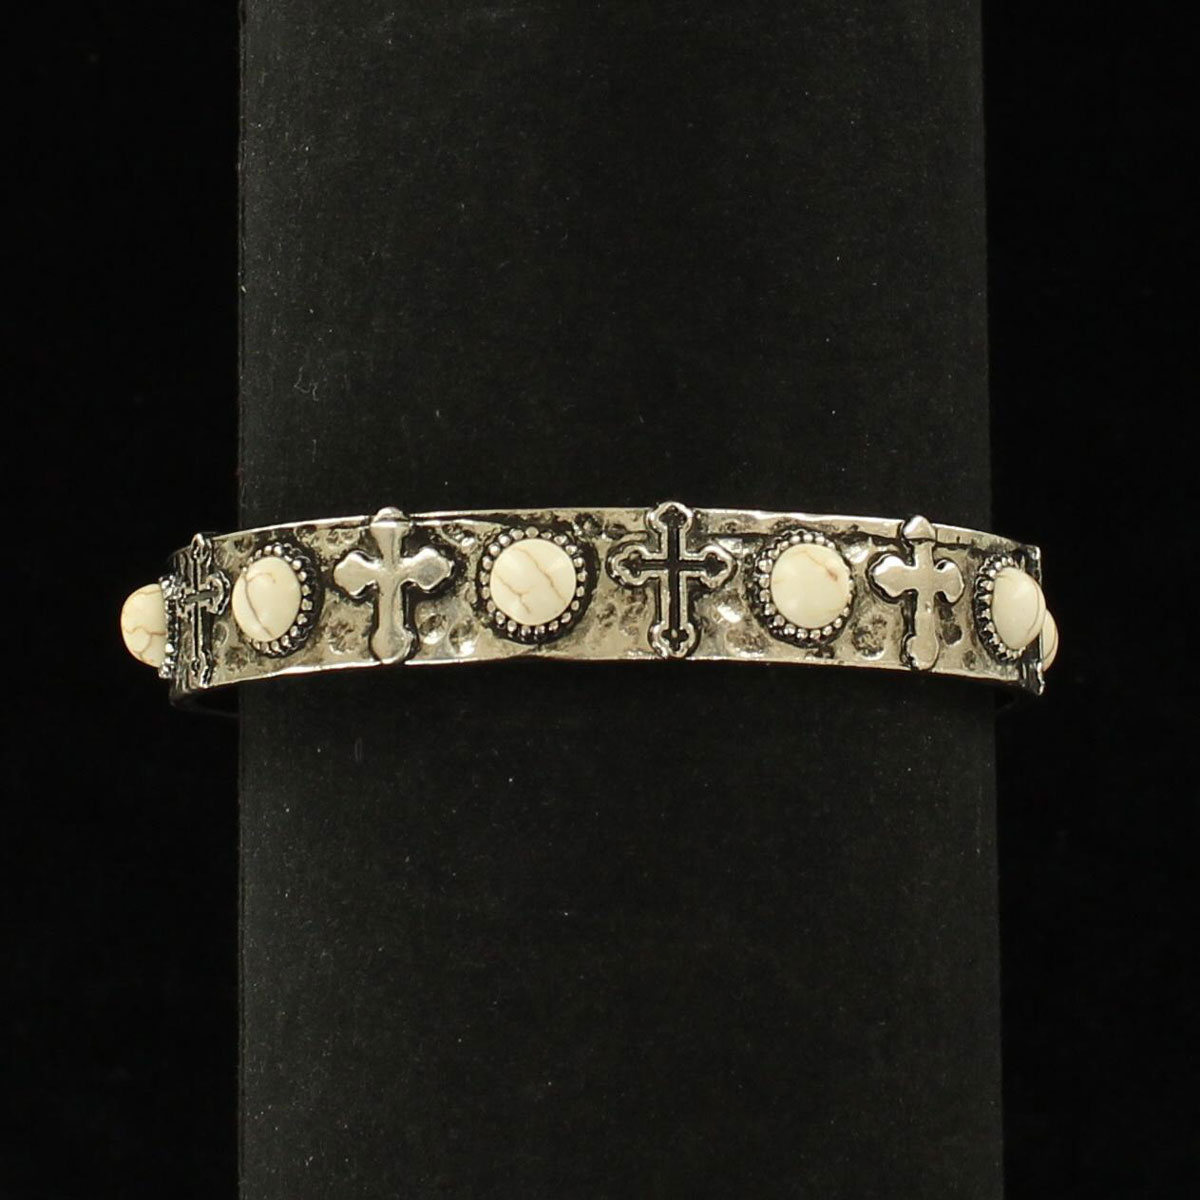 29221 Cross Design White Stones Hammered Look Cuff Style, Silver